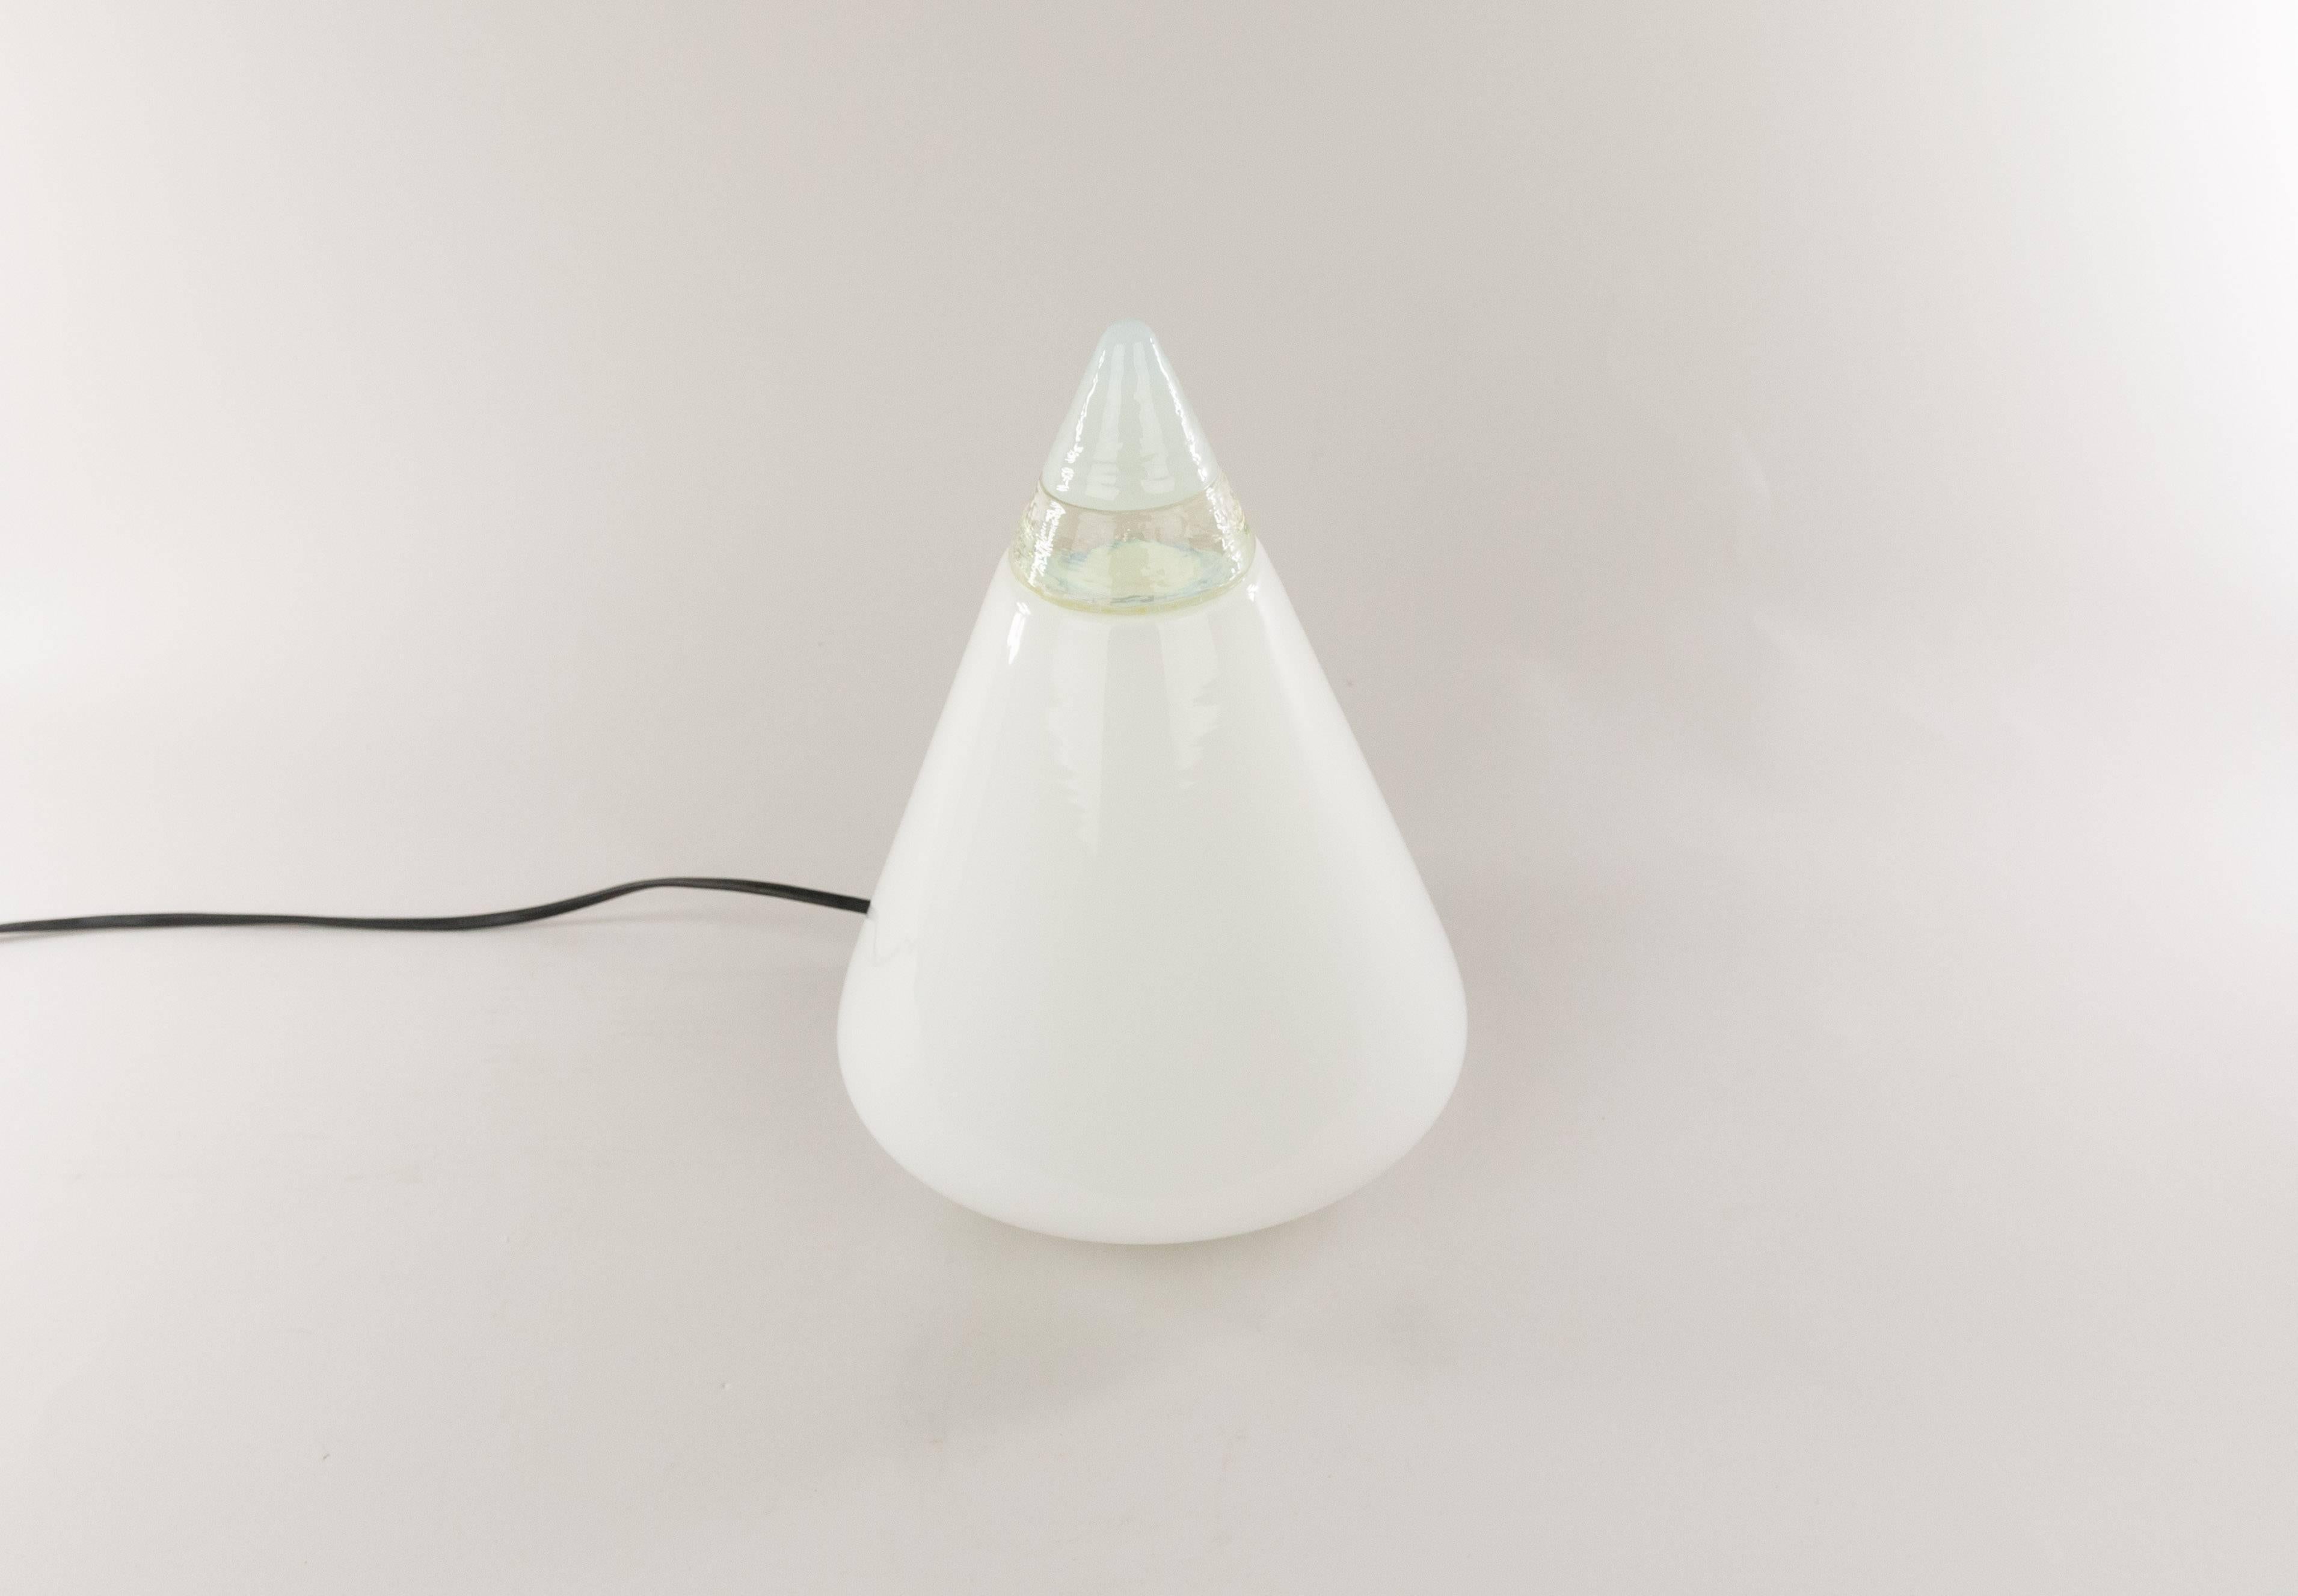 'Rio' table lamp designed by Giusto Toso for Italian manufacturer Leucos. 

The cone-shaped lamp is made of hand blown white glass and has a crystal band as a decoration. 

The glass part is supported by a metal base that is lacquered in white.